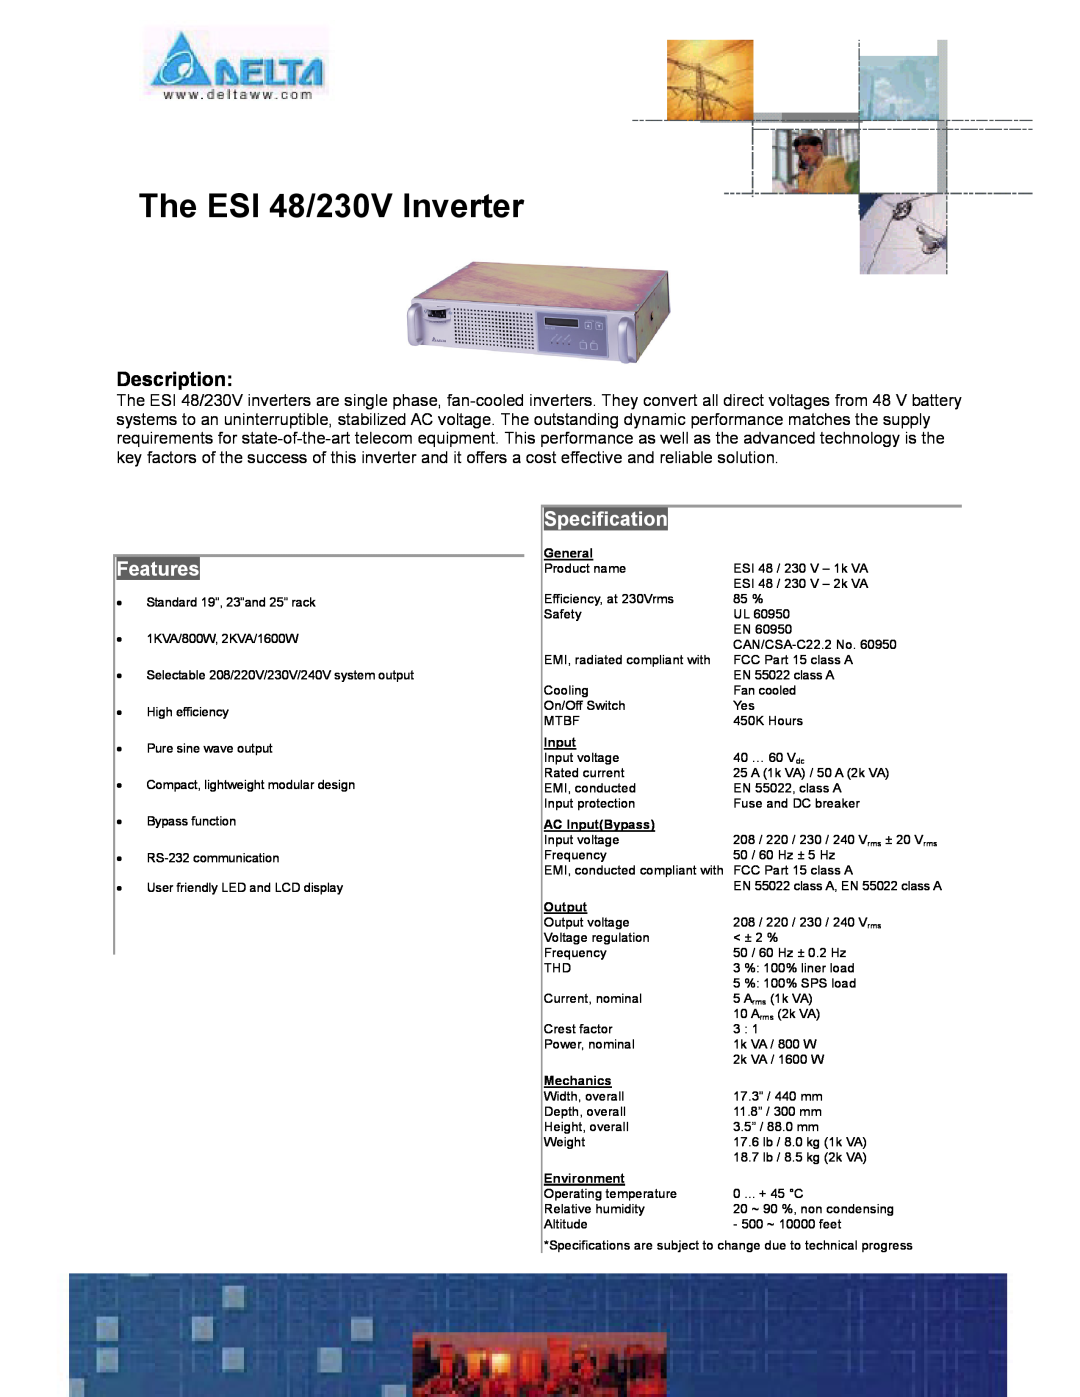 Delta Electronics specifications The ESI 48/230V Inverter, Description, Features, Specification, General, Input, Output 